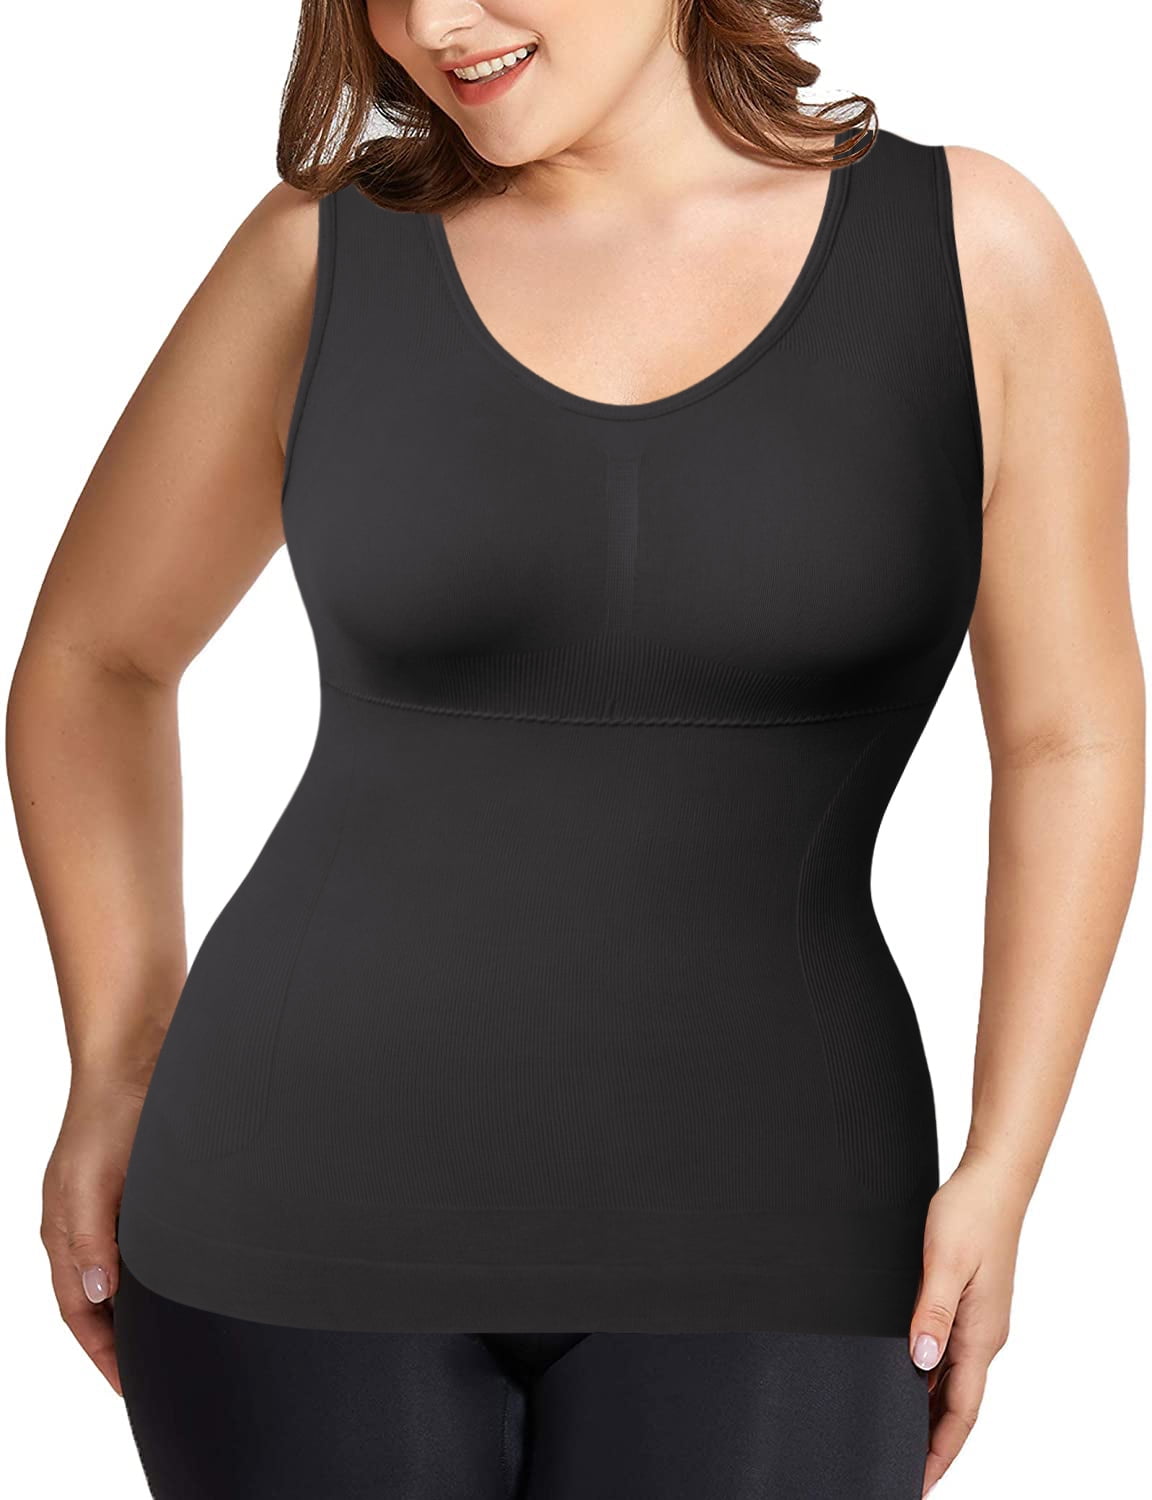 COMFREE Women's Cami Shaper Plus Size with Built in Bra Camisole Tummy ...